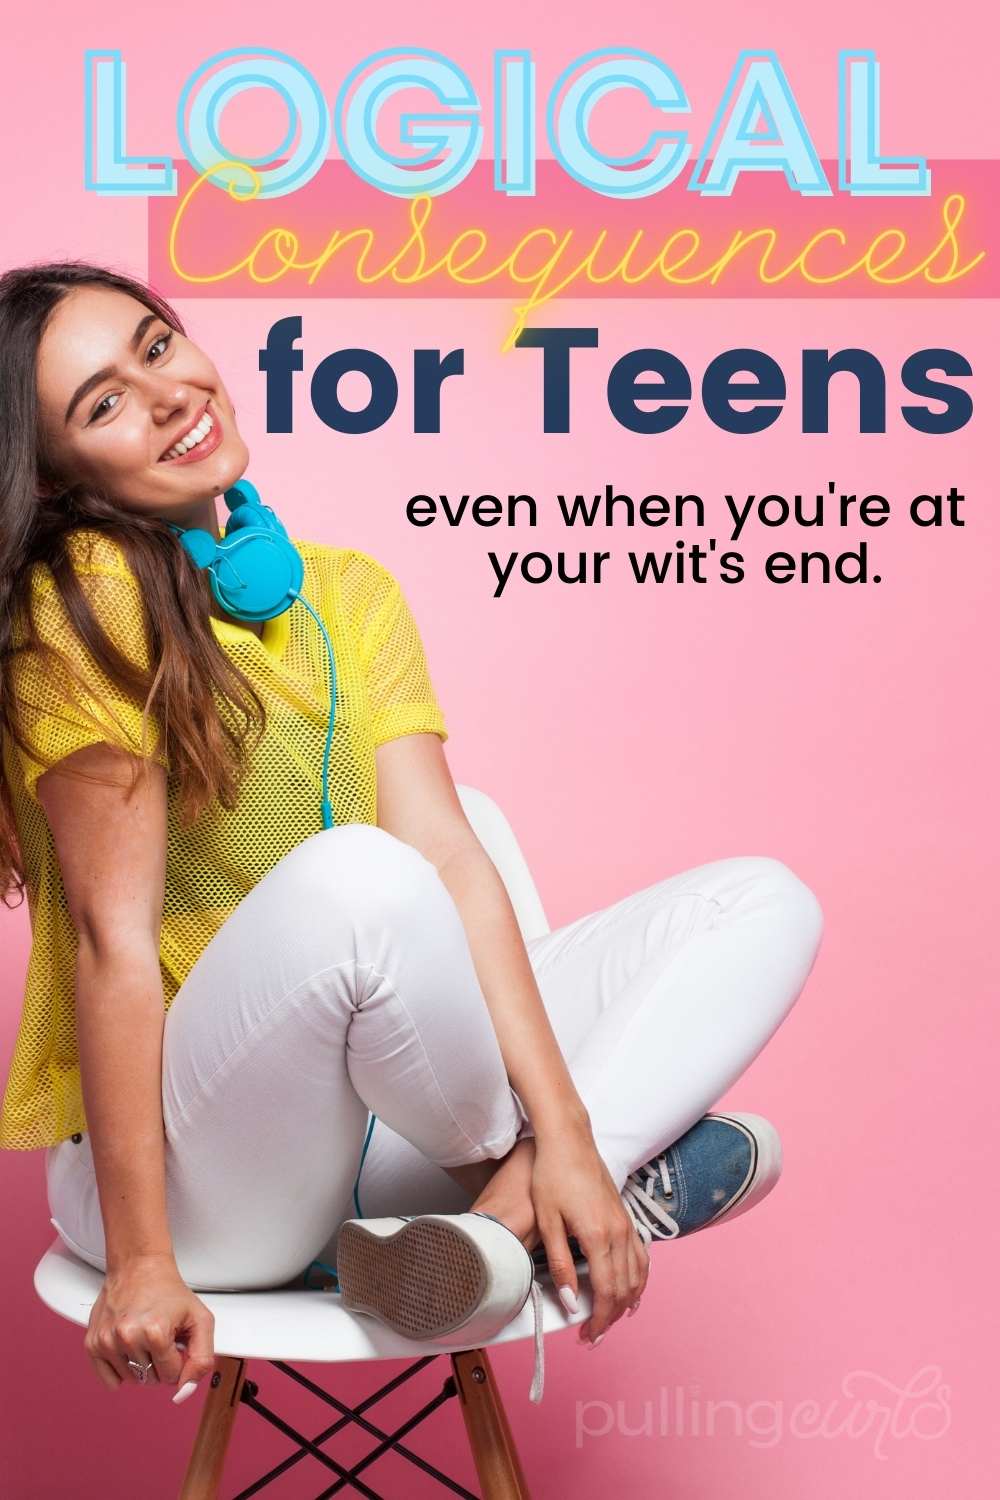 This post is going to explore effective consequences for teenagers and how they can improve your relationship with them, while also preparing them for real life.  This list of logical consequences for teenagers (even for disrespectful behavior) are the best to prepare them for real life, even when you're at your wits end. via @pullingcurls